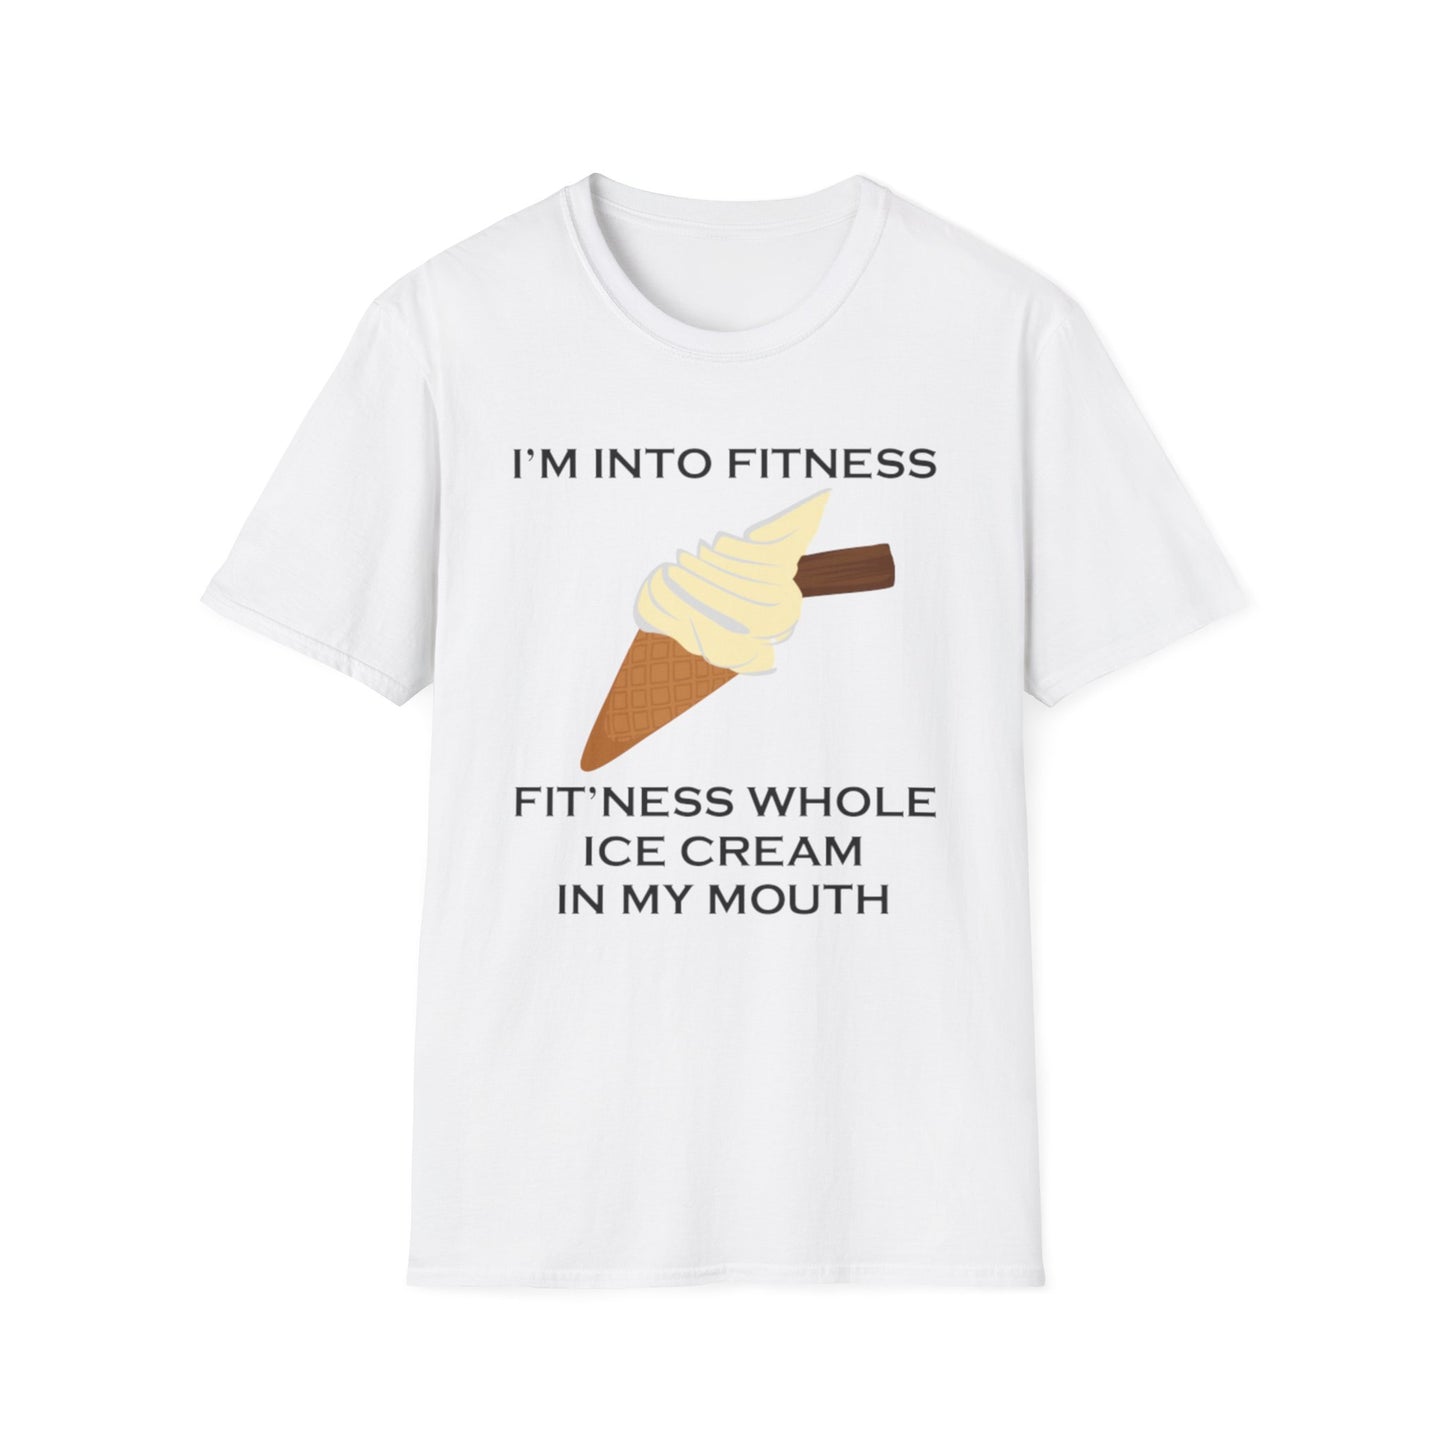 A white t-shirt with a design of ice cream and the funny quote: I'm Into Fitness, Fit'ness Whole Ice Cream In My Mouth